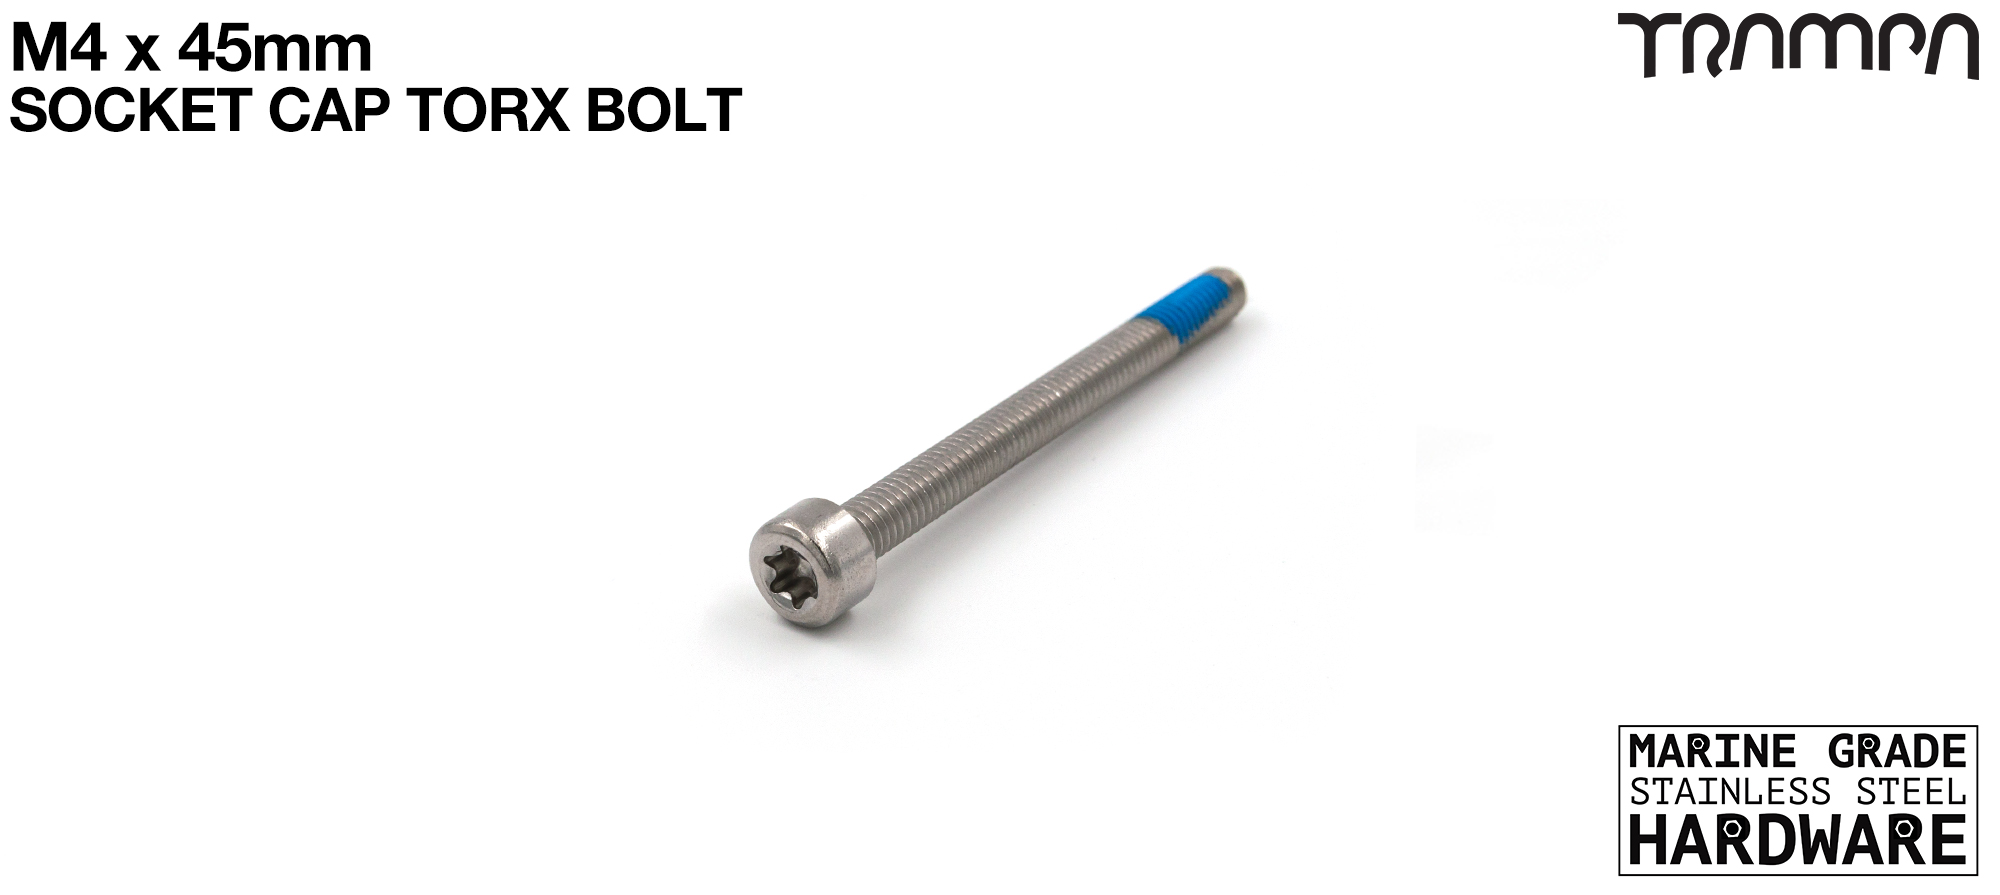 M4 x 45mm Socket Capped TORX Bolt - Marine Grade Stainless steel with locking paste 